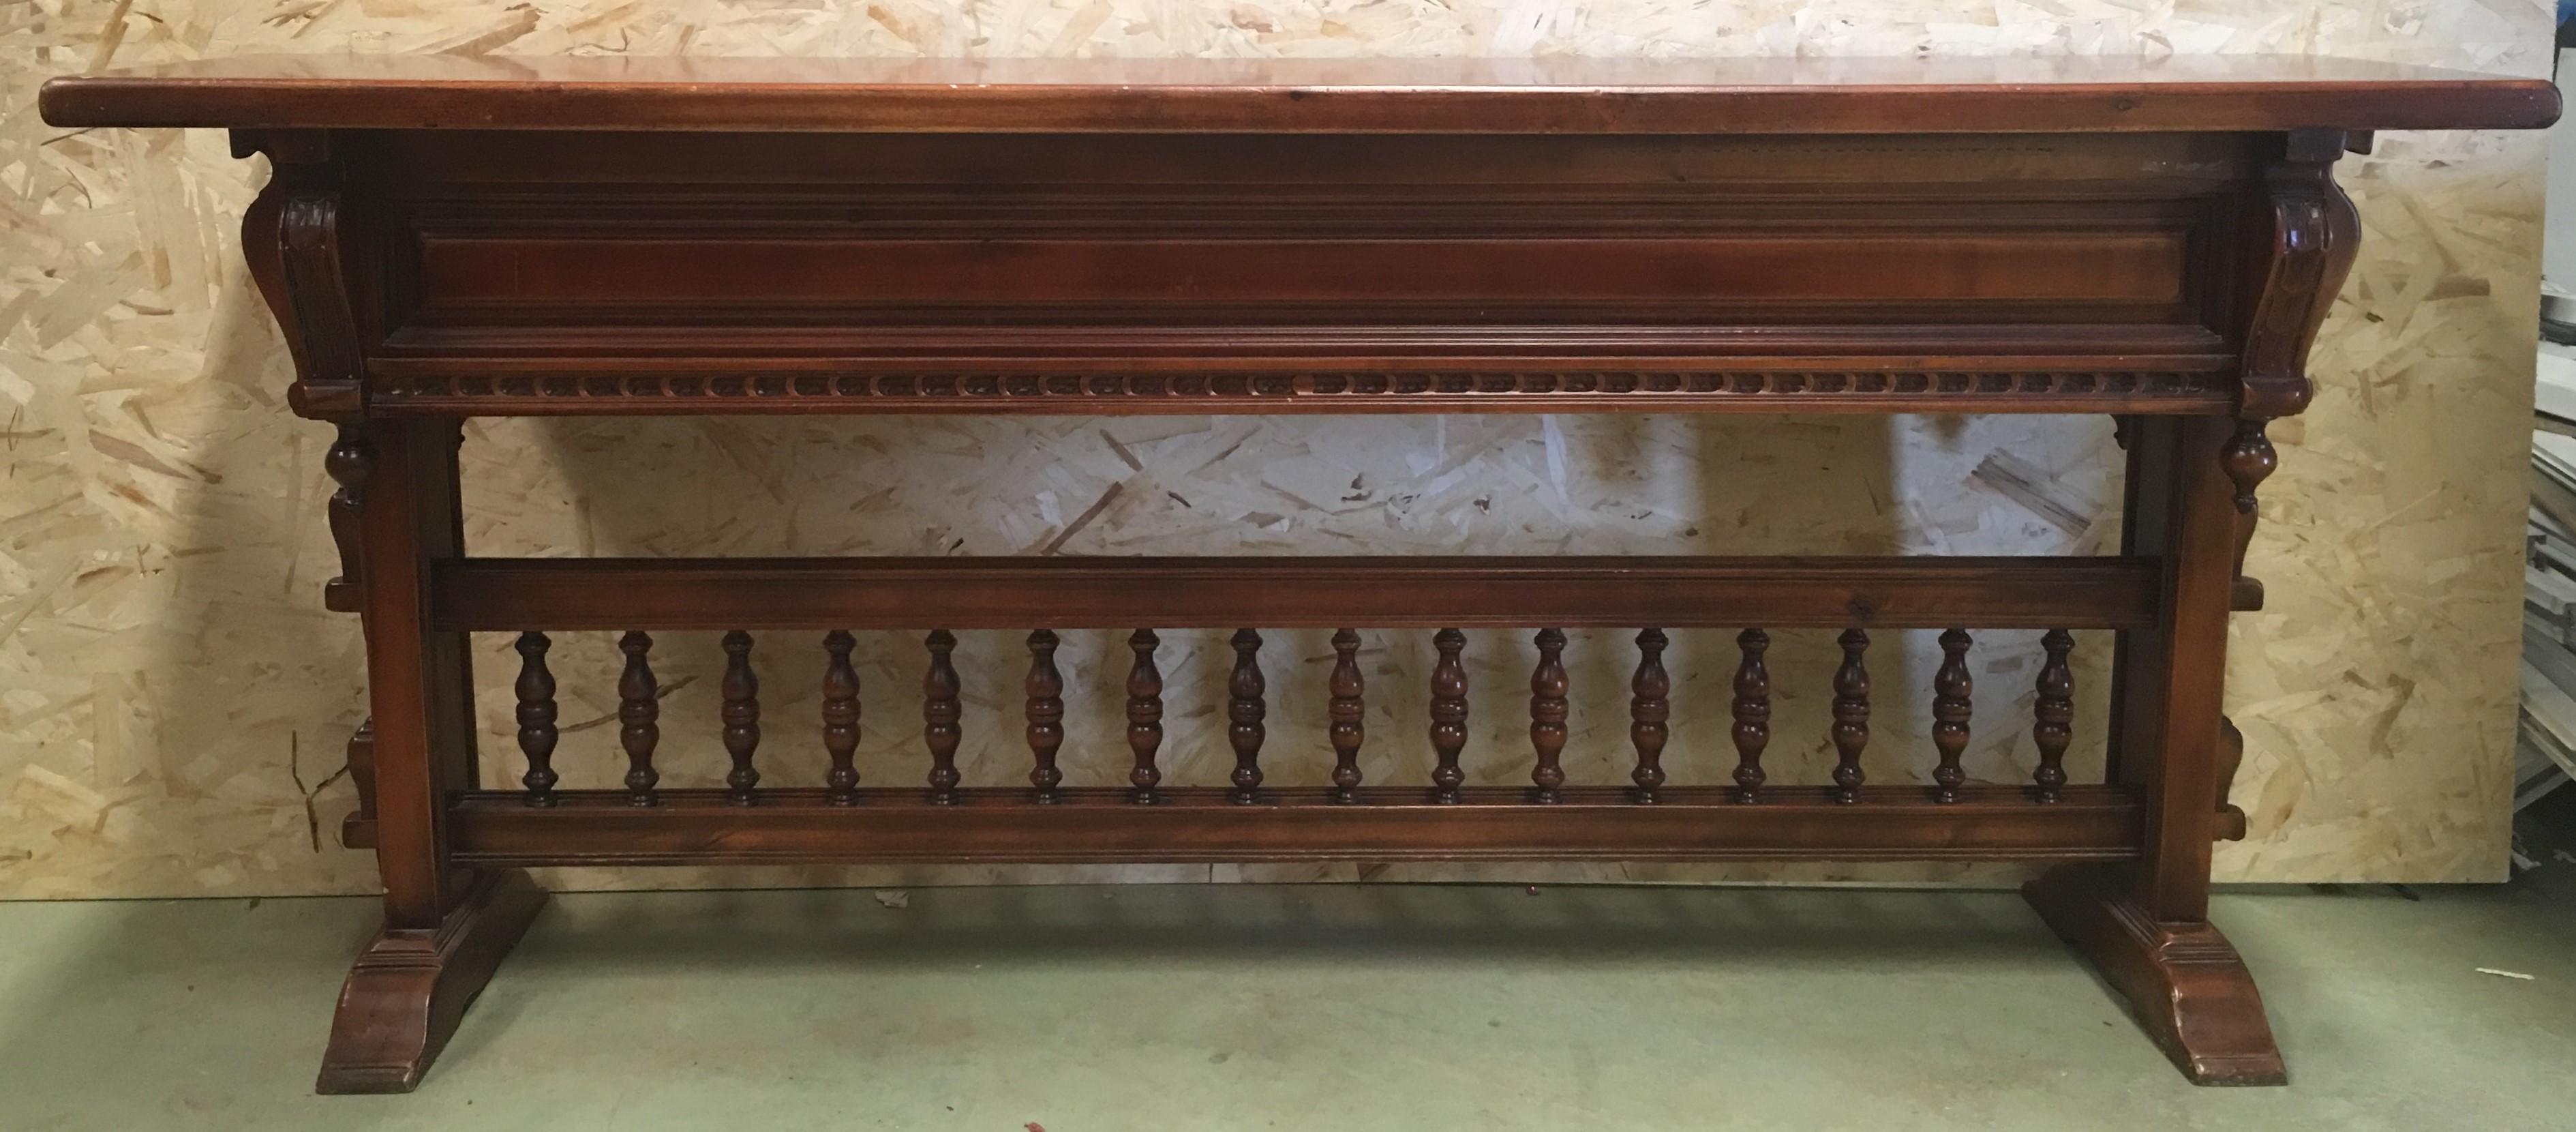 20th century walnut console table with four carved drawers signed by Valentí.